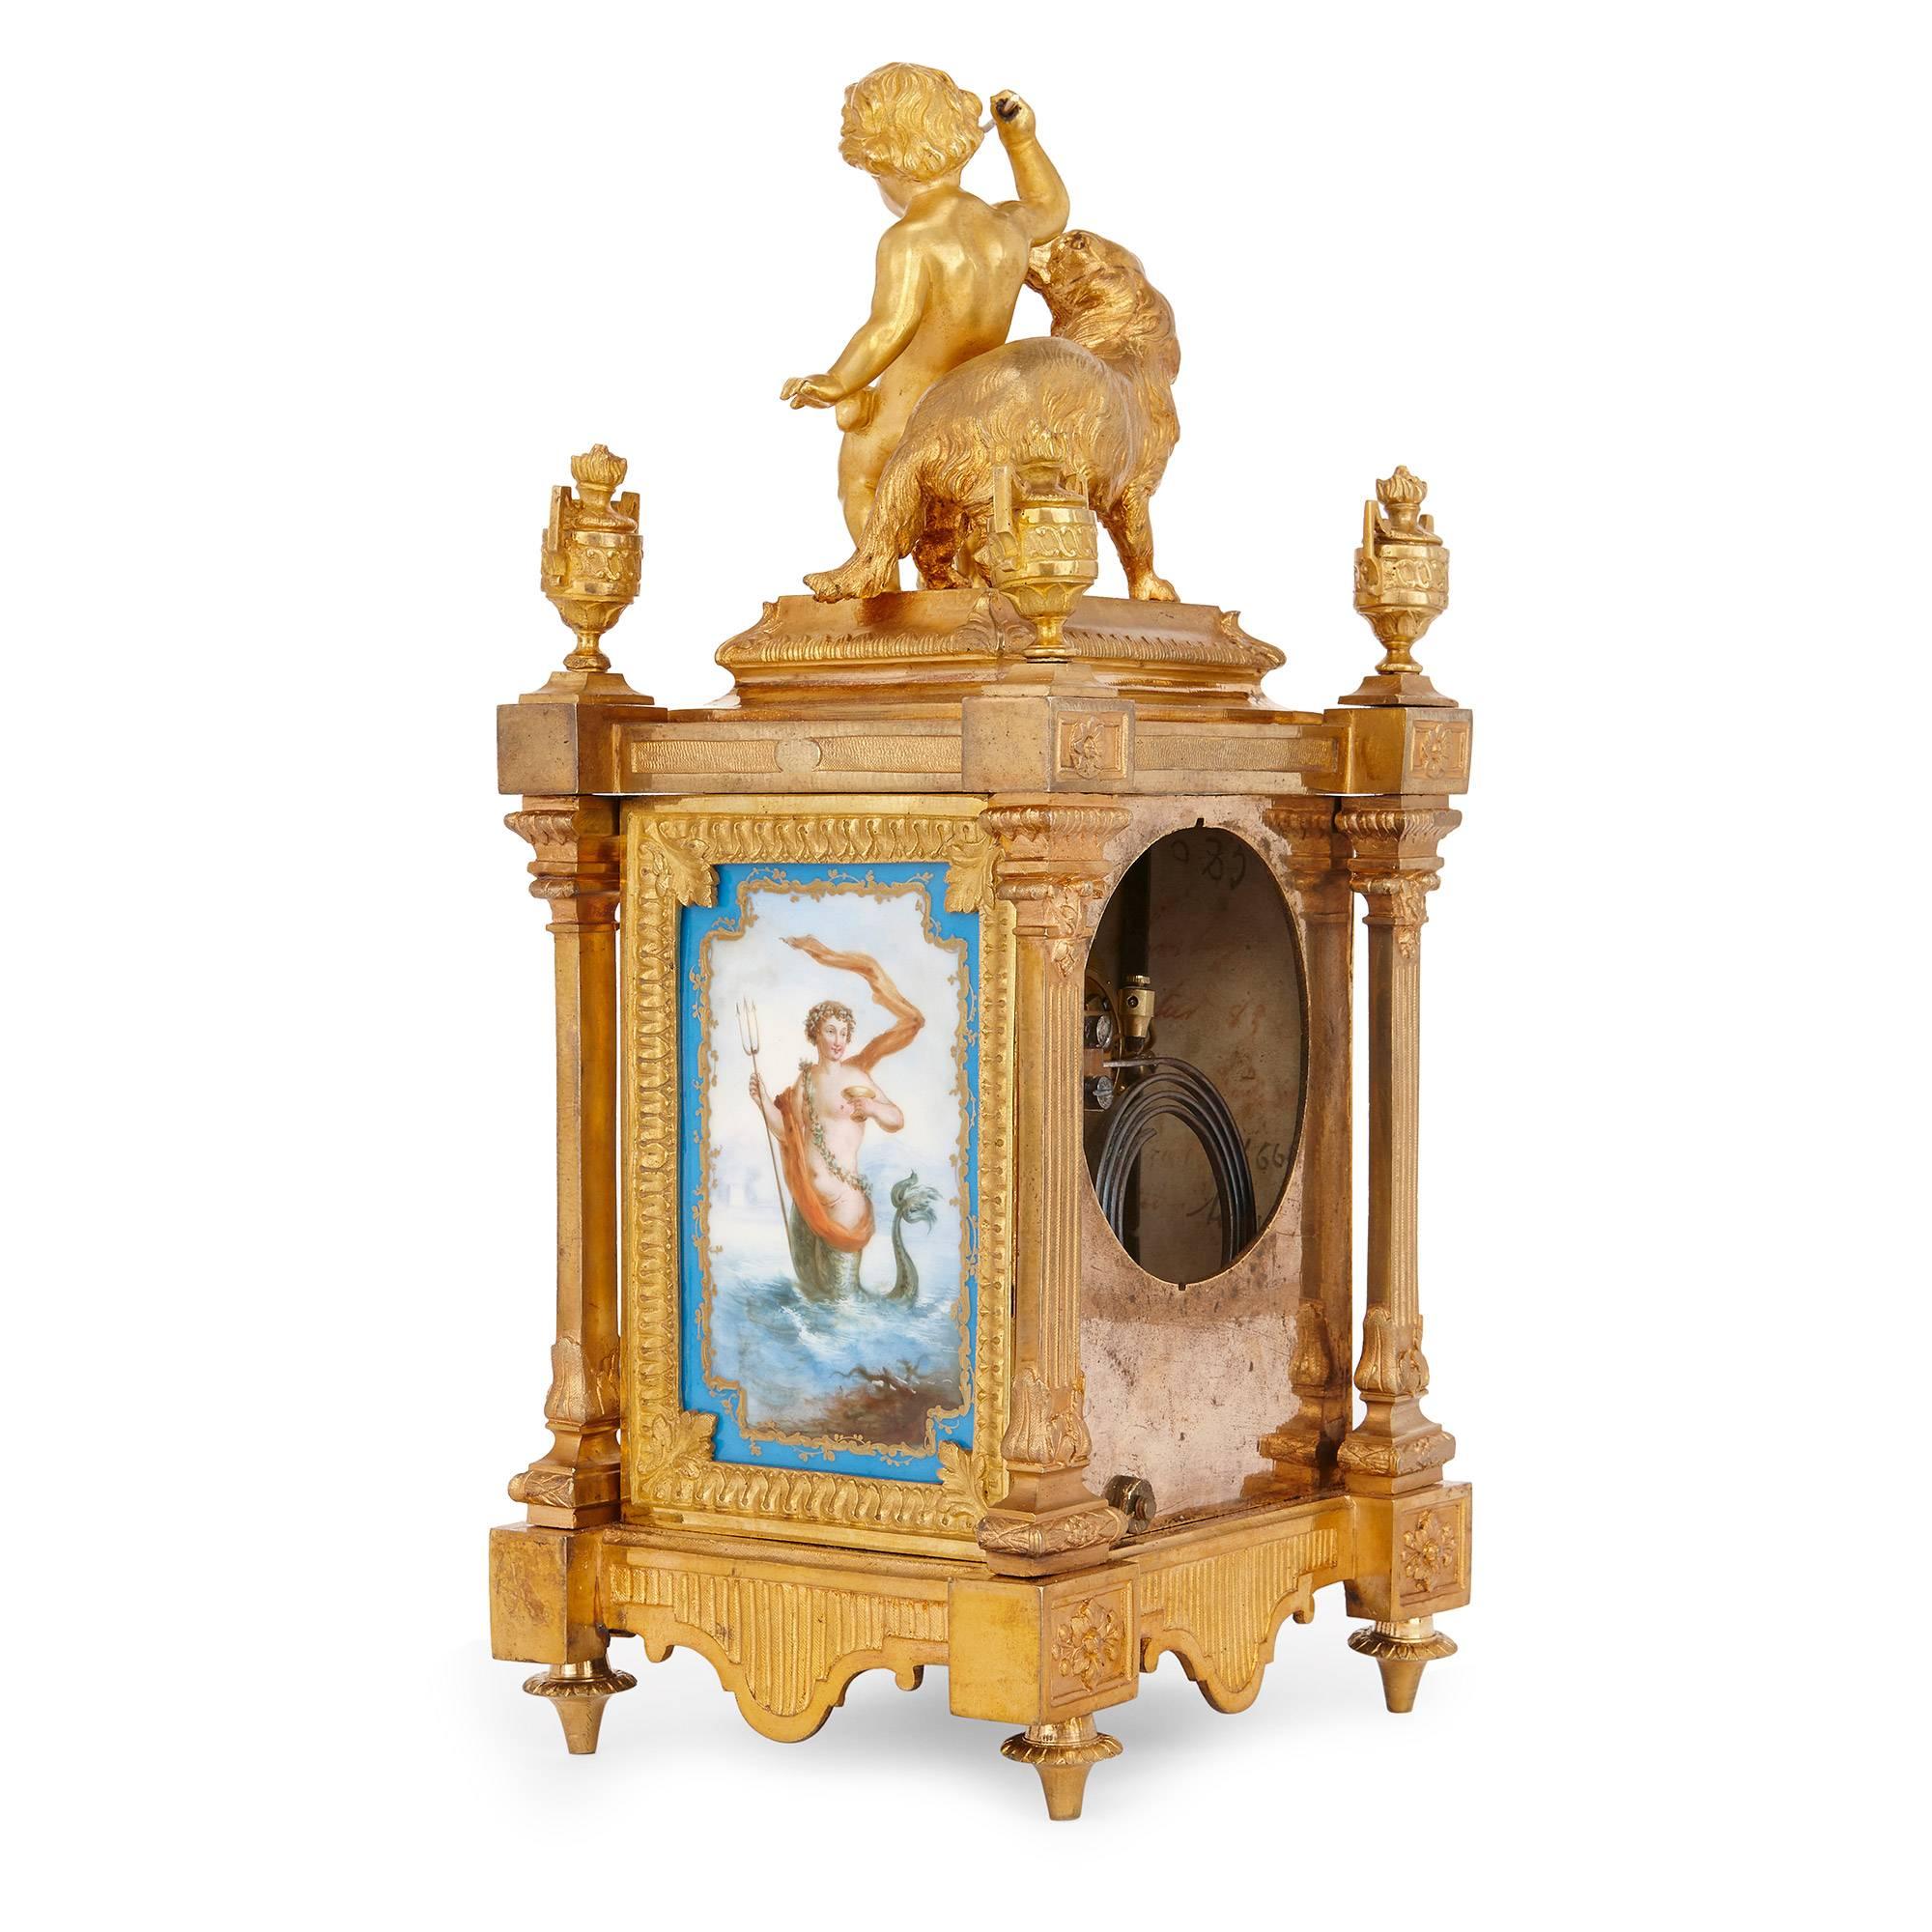 19th Century Neoclassical Mantel Clock in Ormolu and Sevres Style Porcelain by Ernest Royer For Sale